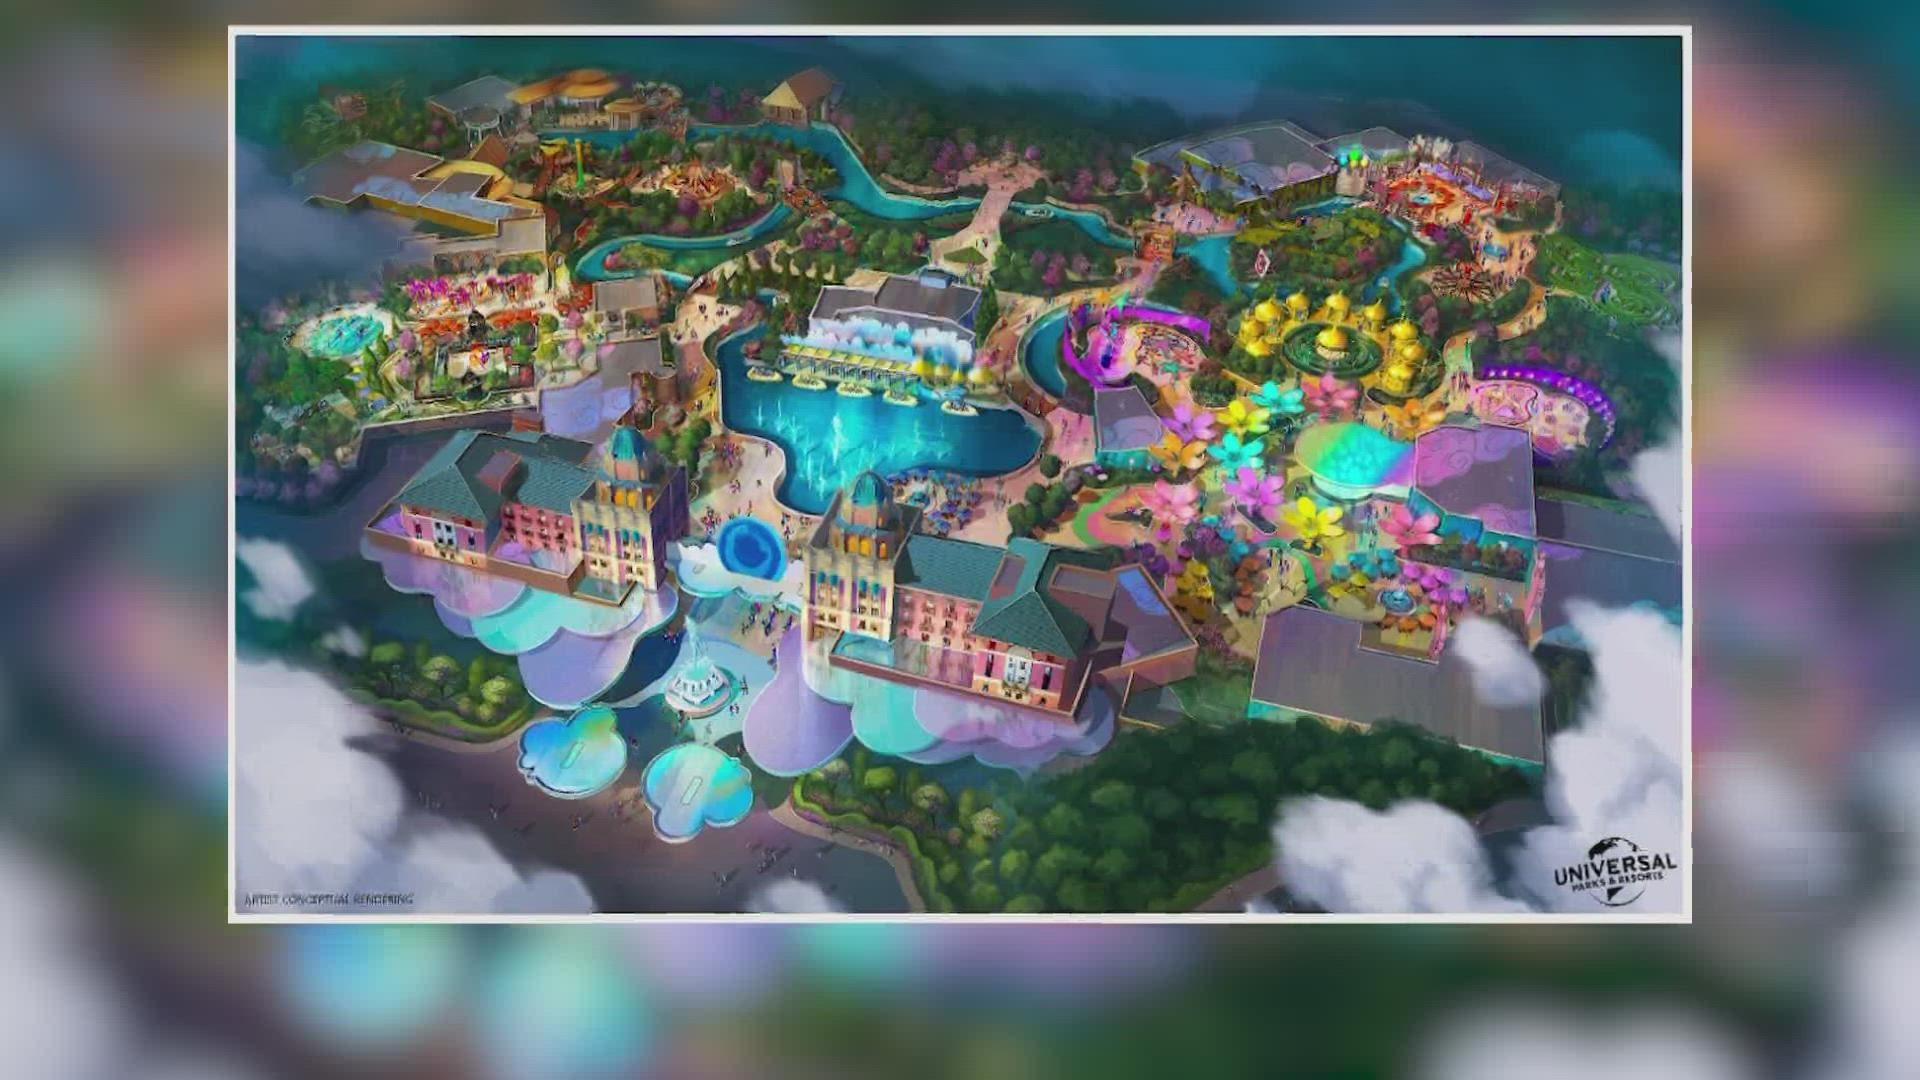 The park will be a kids-themed park with immersive experiences and rides involving Universal movies, leaders said